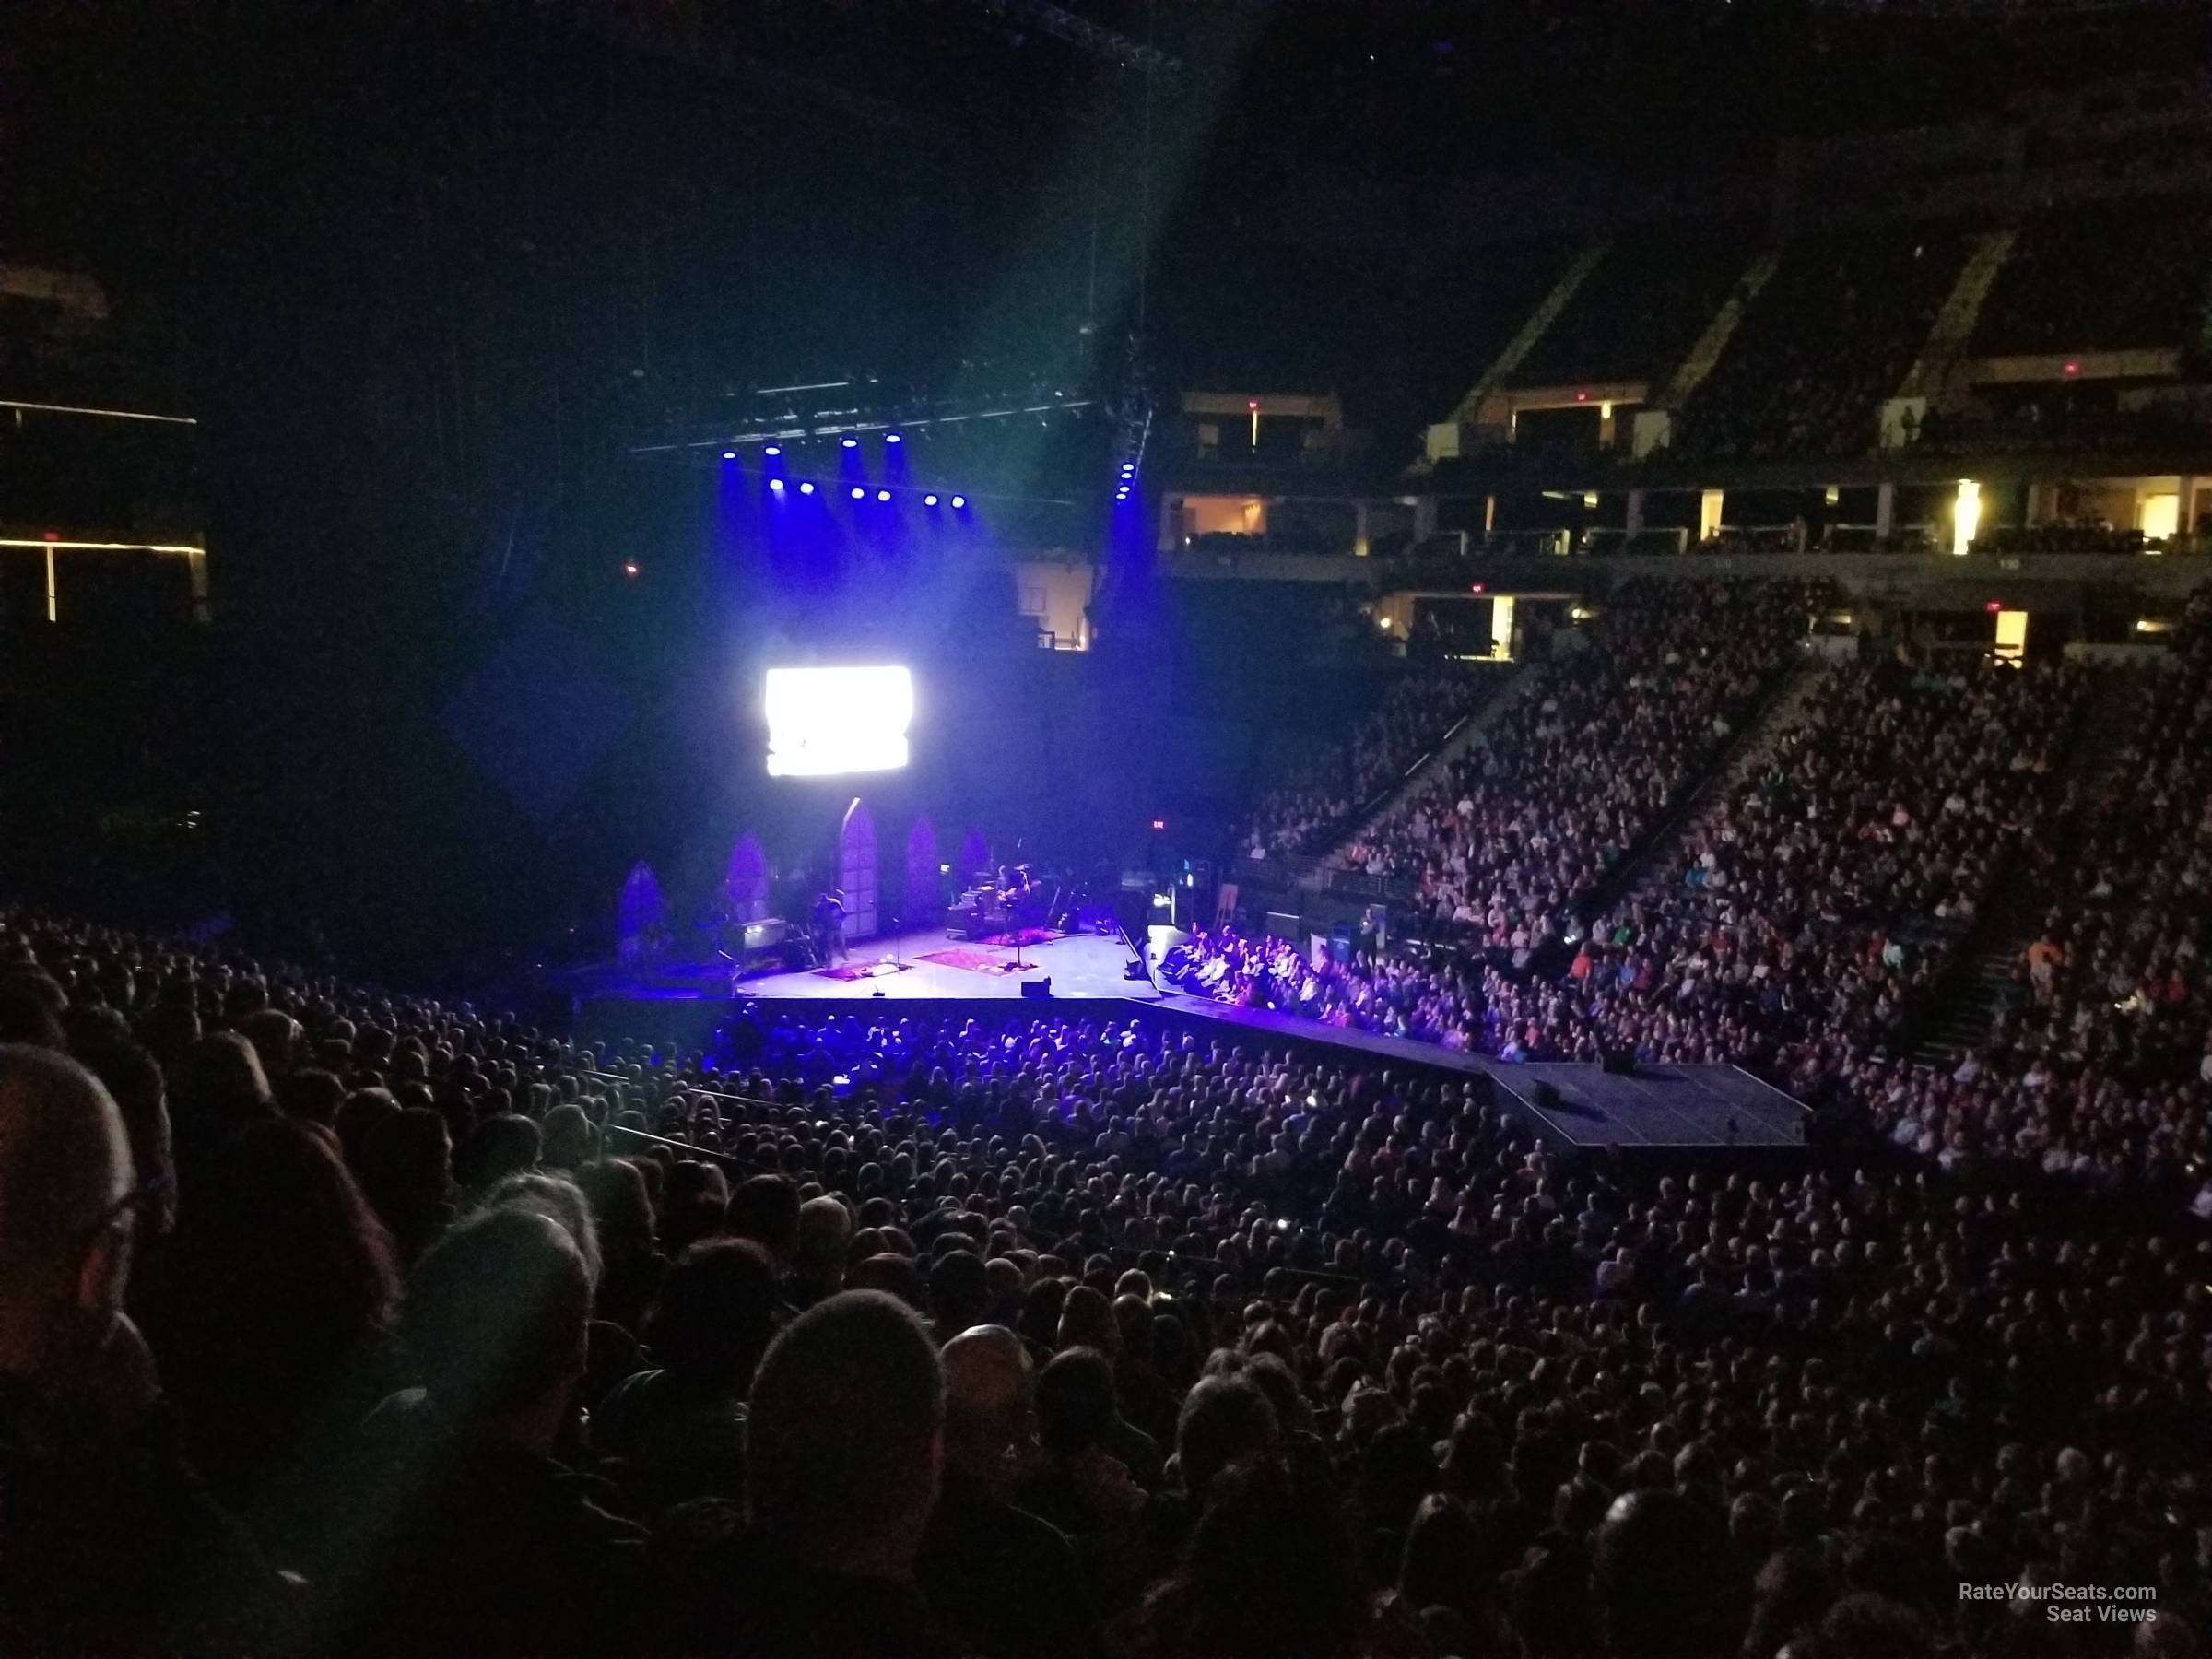 Section 111 at Target Center for Concerts